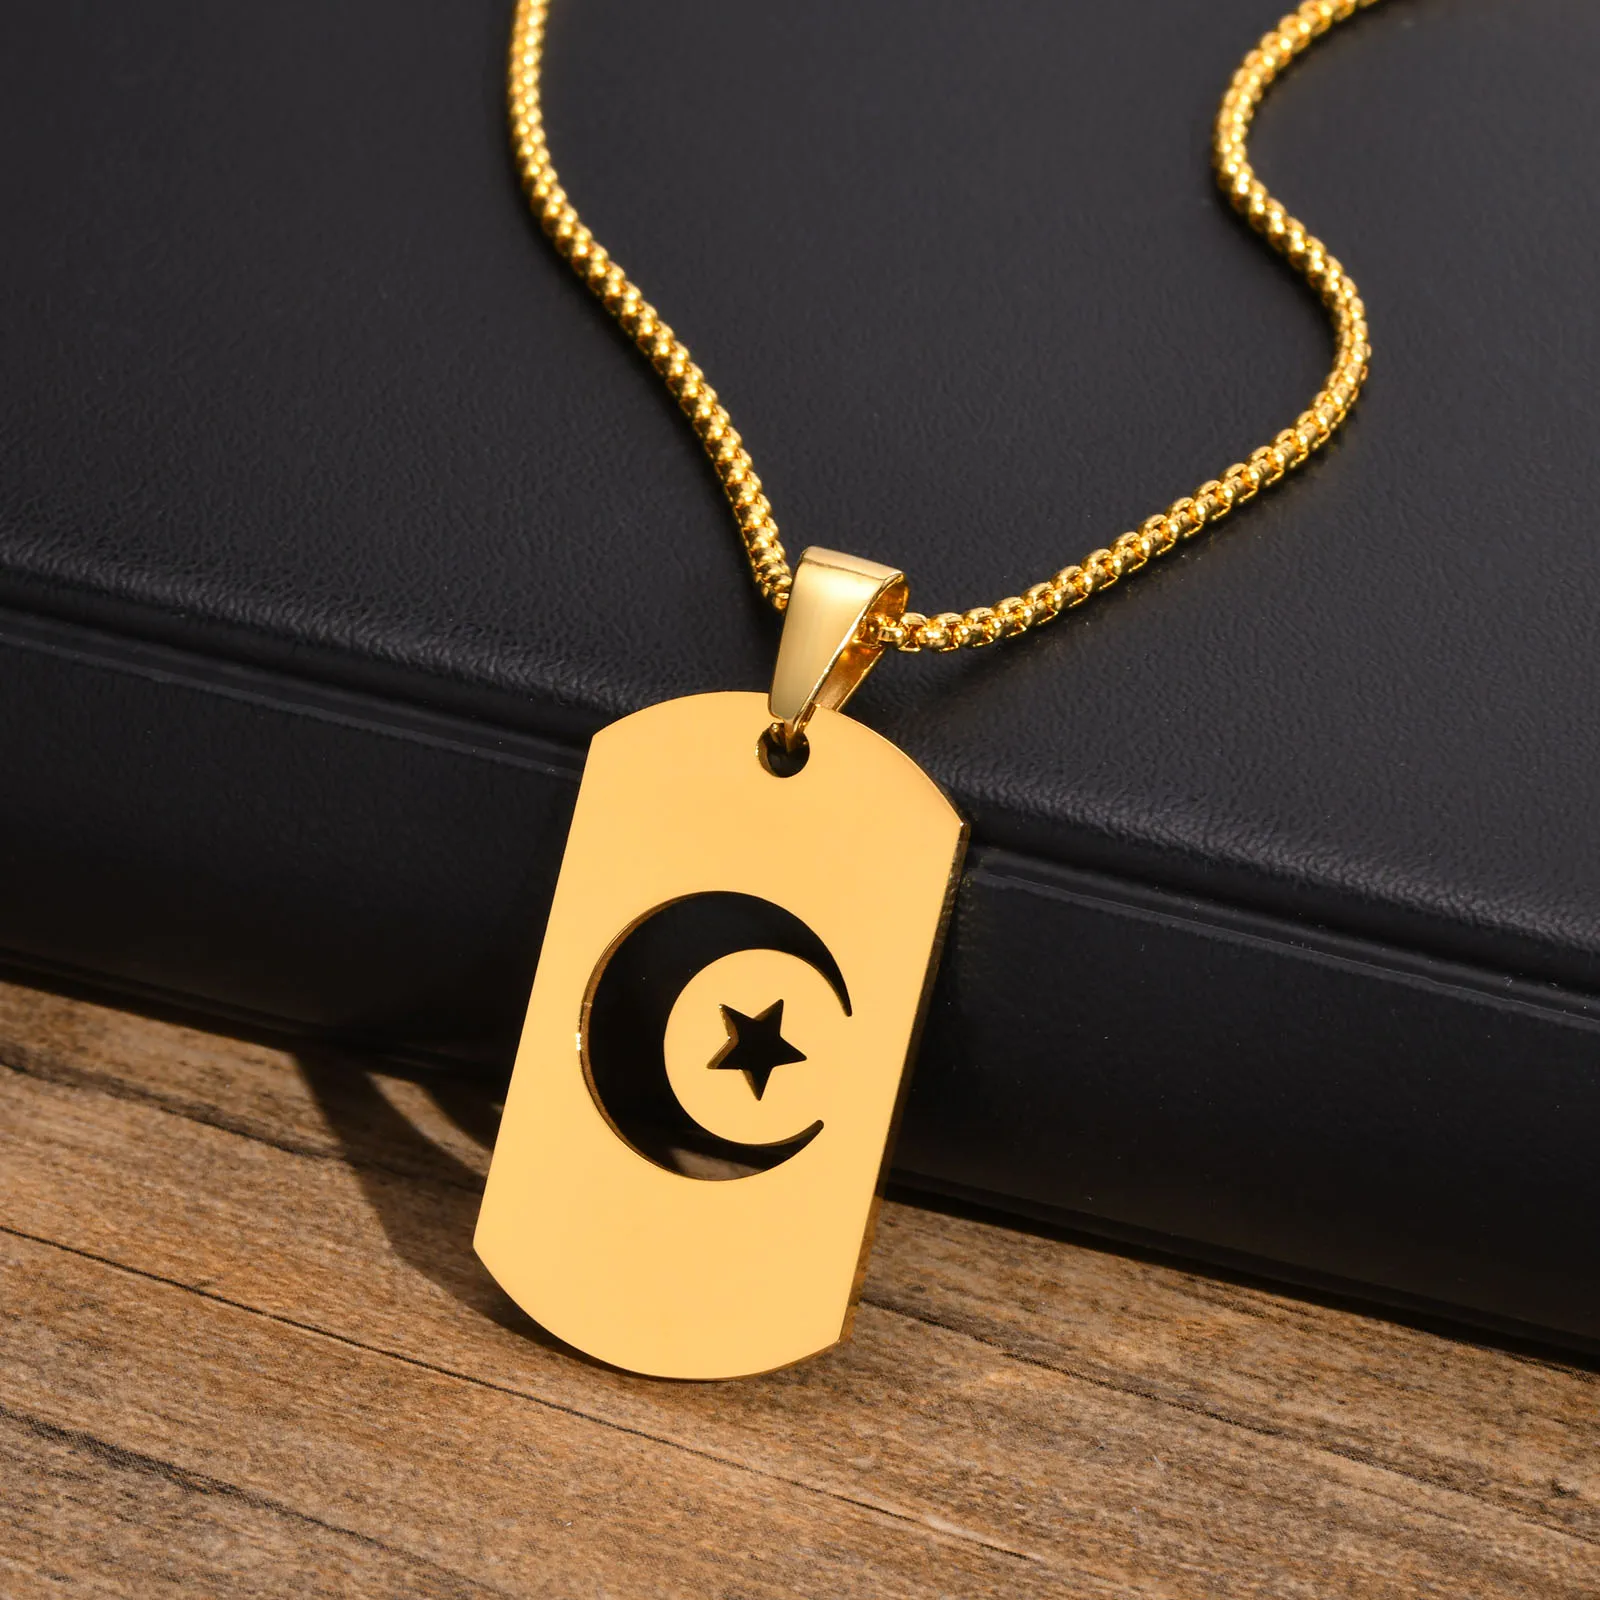 

Vnox Stainless Steel Crescent Moon Star Dog Tag Pendant Necklaces for Men Women,Islamic Muslim Religious Collar Jewelry